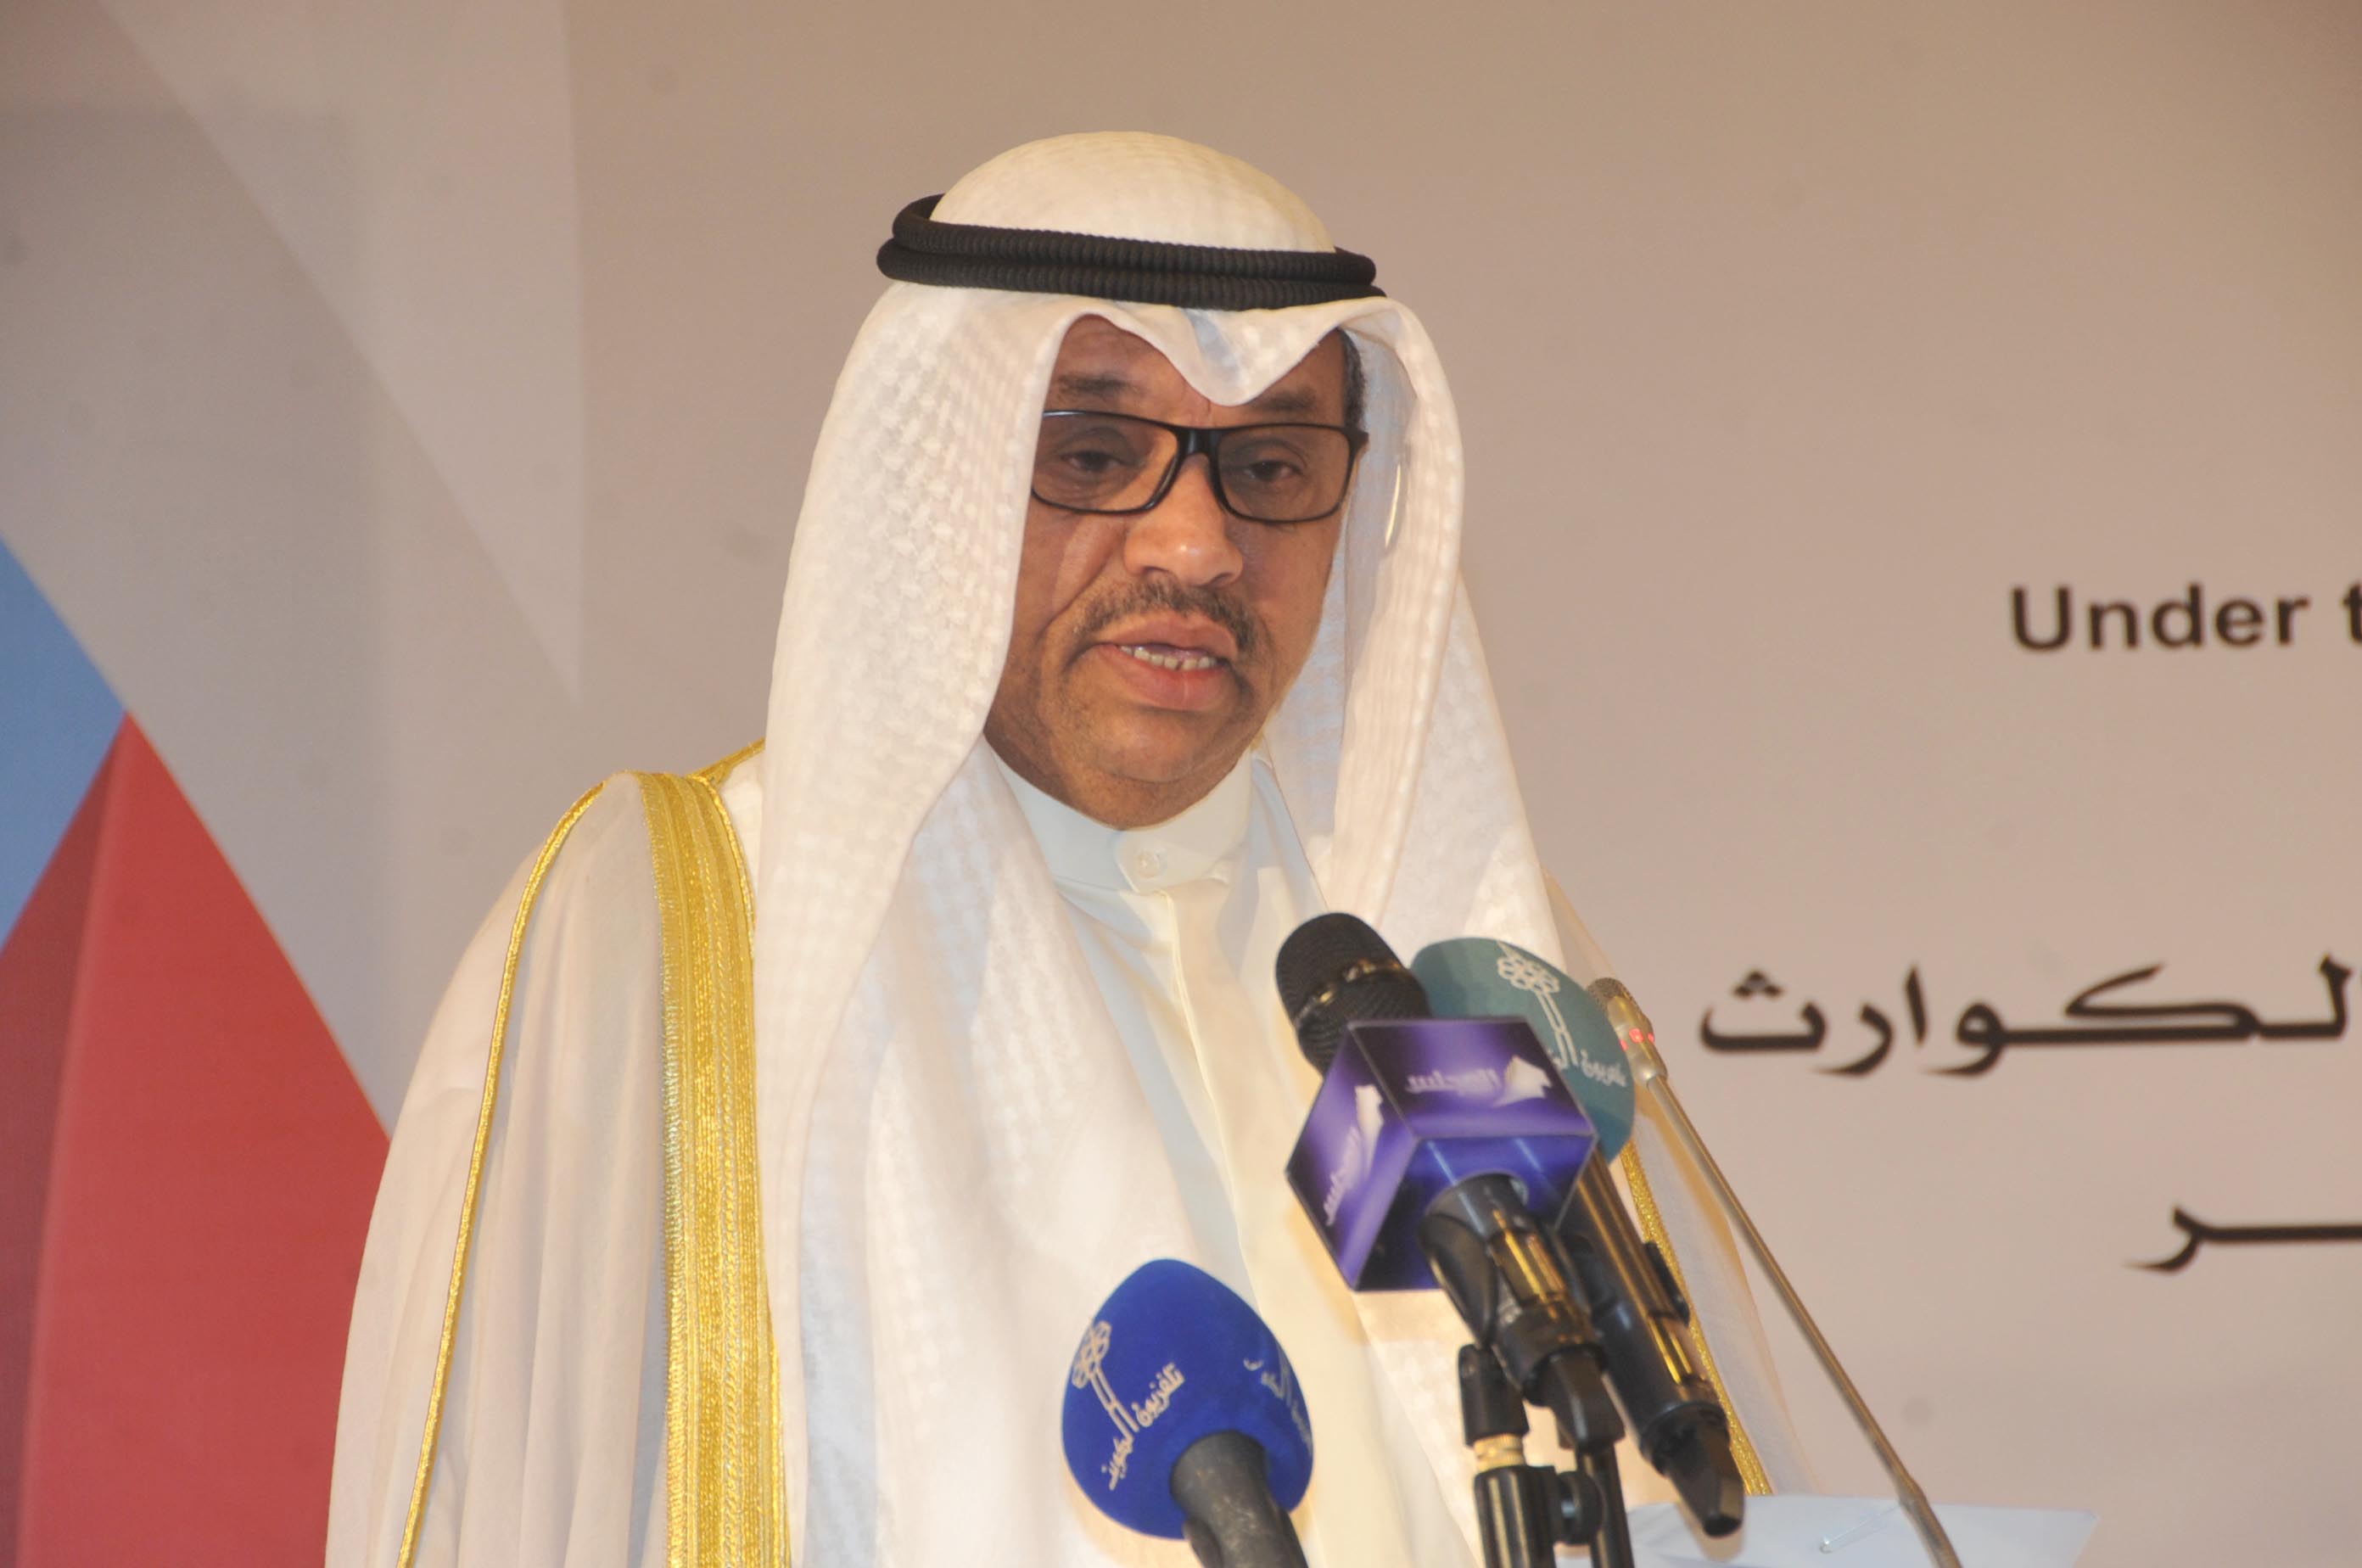 representative of the First Deputy Prime Minister and Minister of Foreign Affairs, Jassem Al-Mubarki